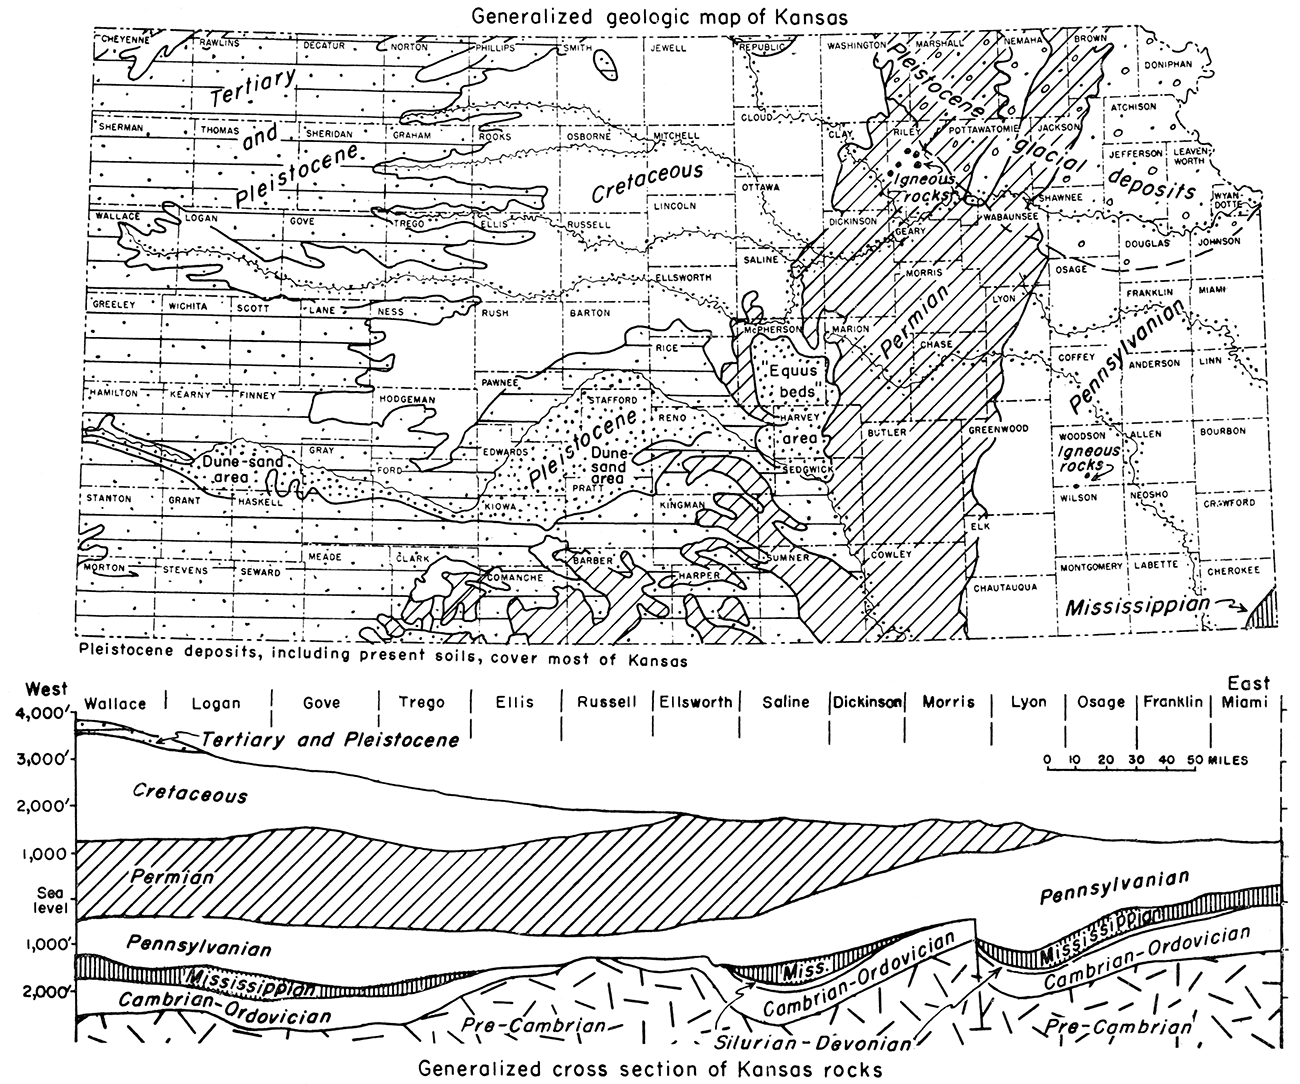 Generalized areal geologic map and cross section of Kansas.